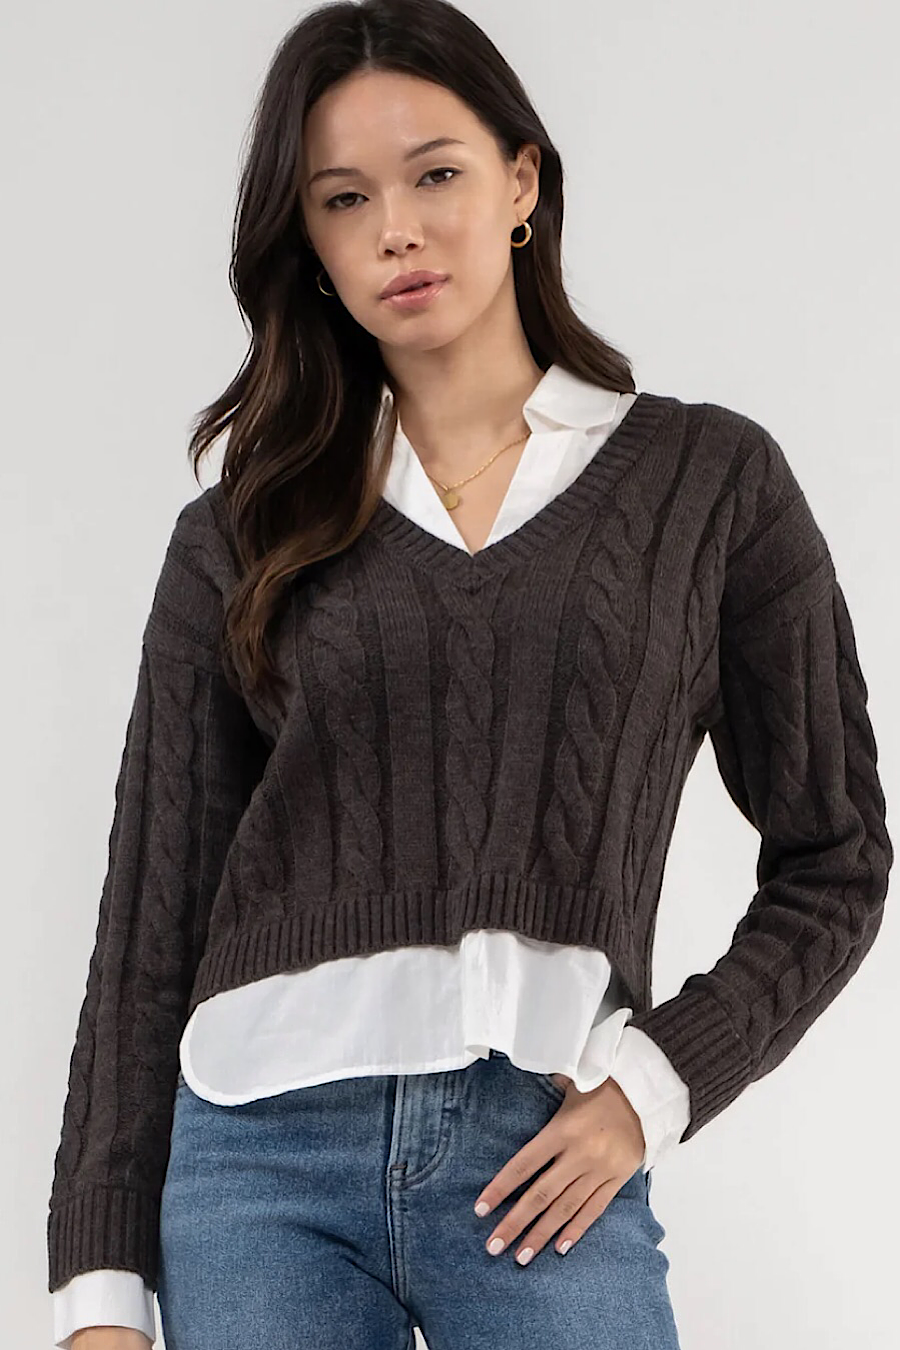 Goal Chaser Layered Sweater